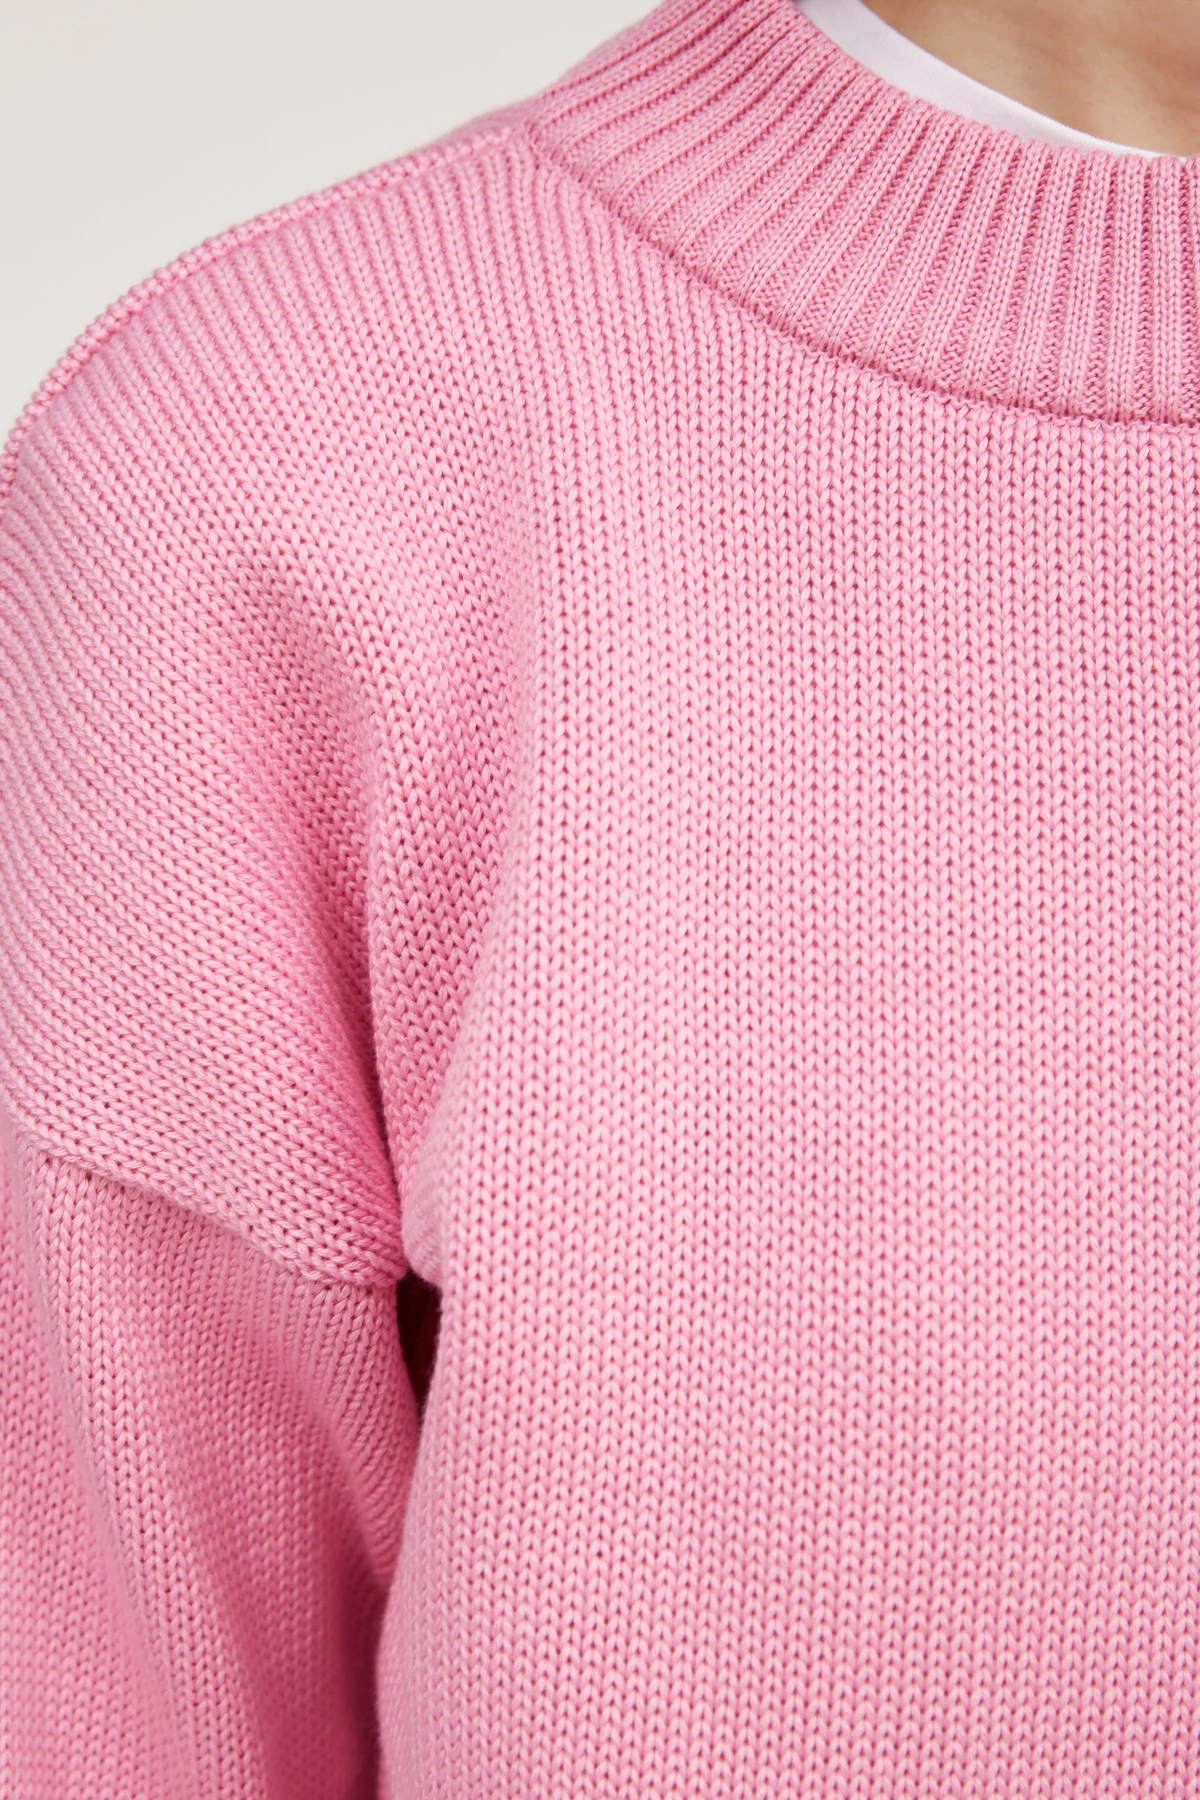 Pink knitted cotton sweater, photo 2